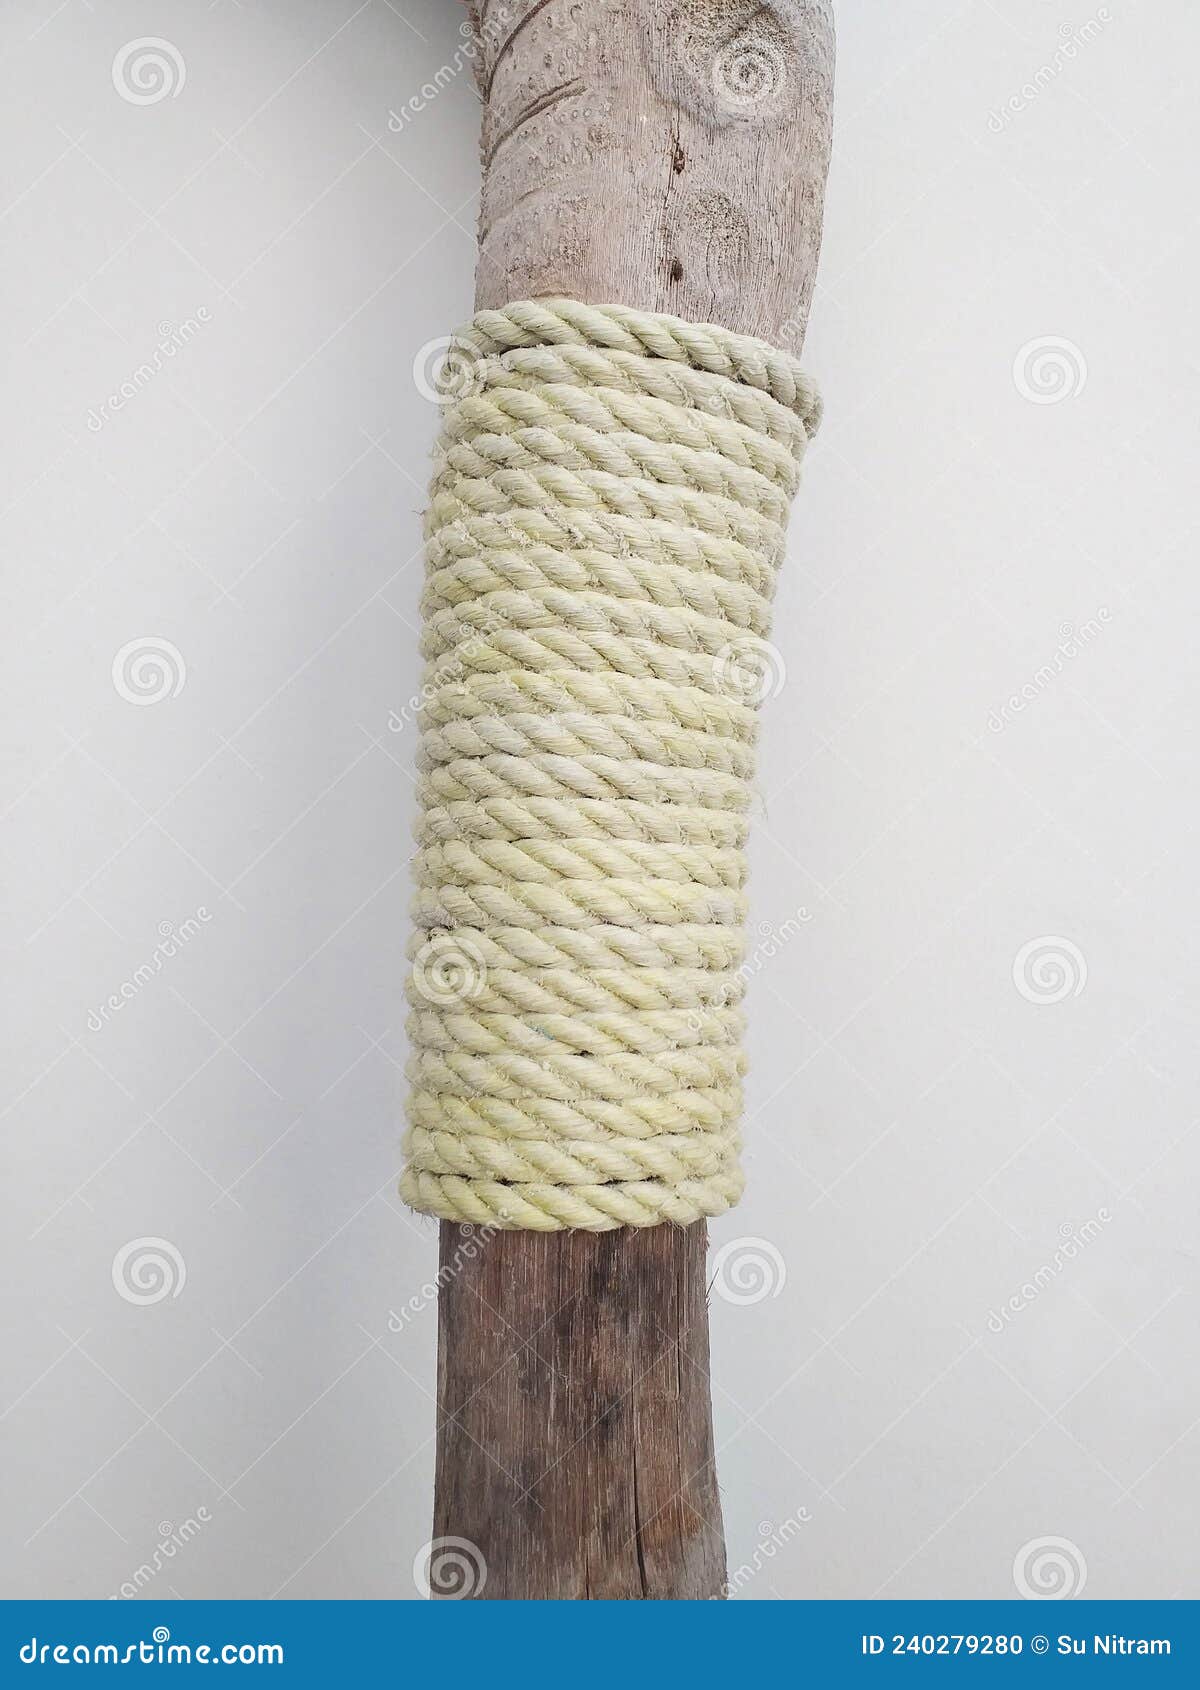 Thick Braided Rope Tied on Wooden Stick on White Background. Skein of Rope  Jute. Rustic Rope Roll. Decoration and Ornate Stock Photo - Image of brown,  knot: 240279280